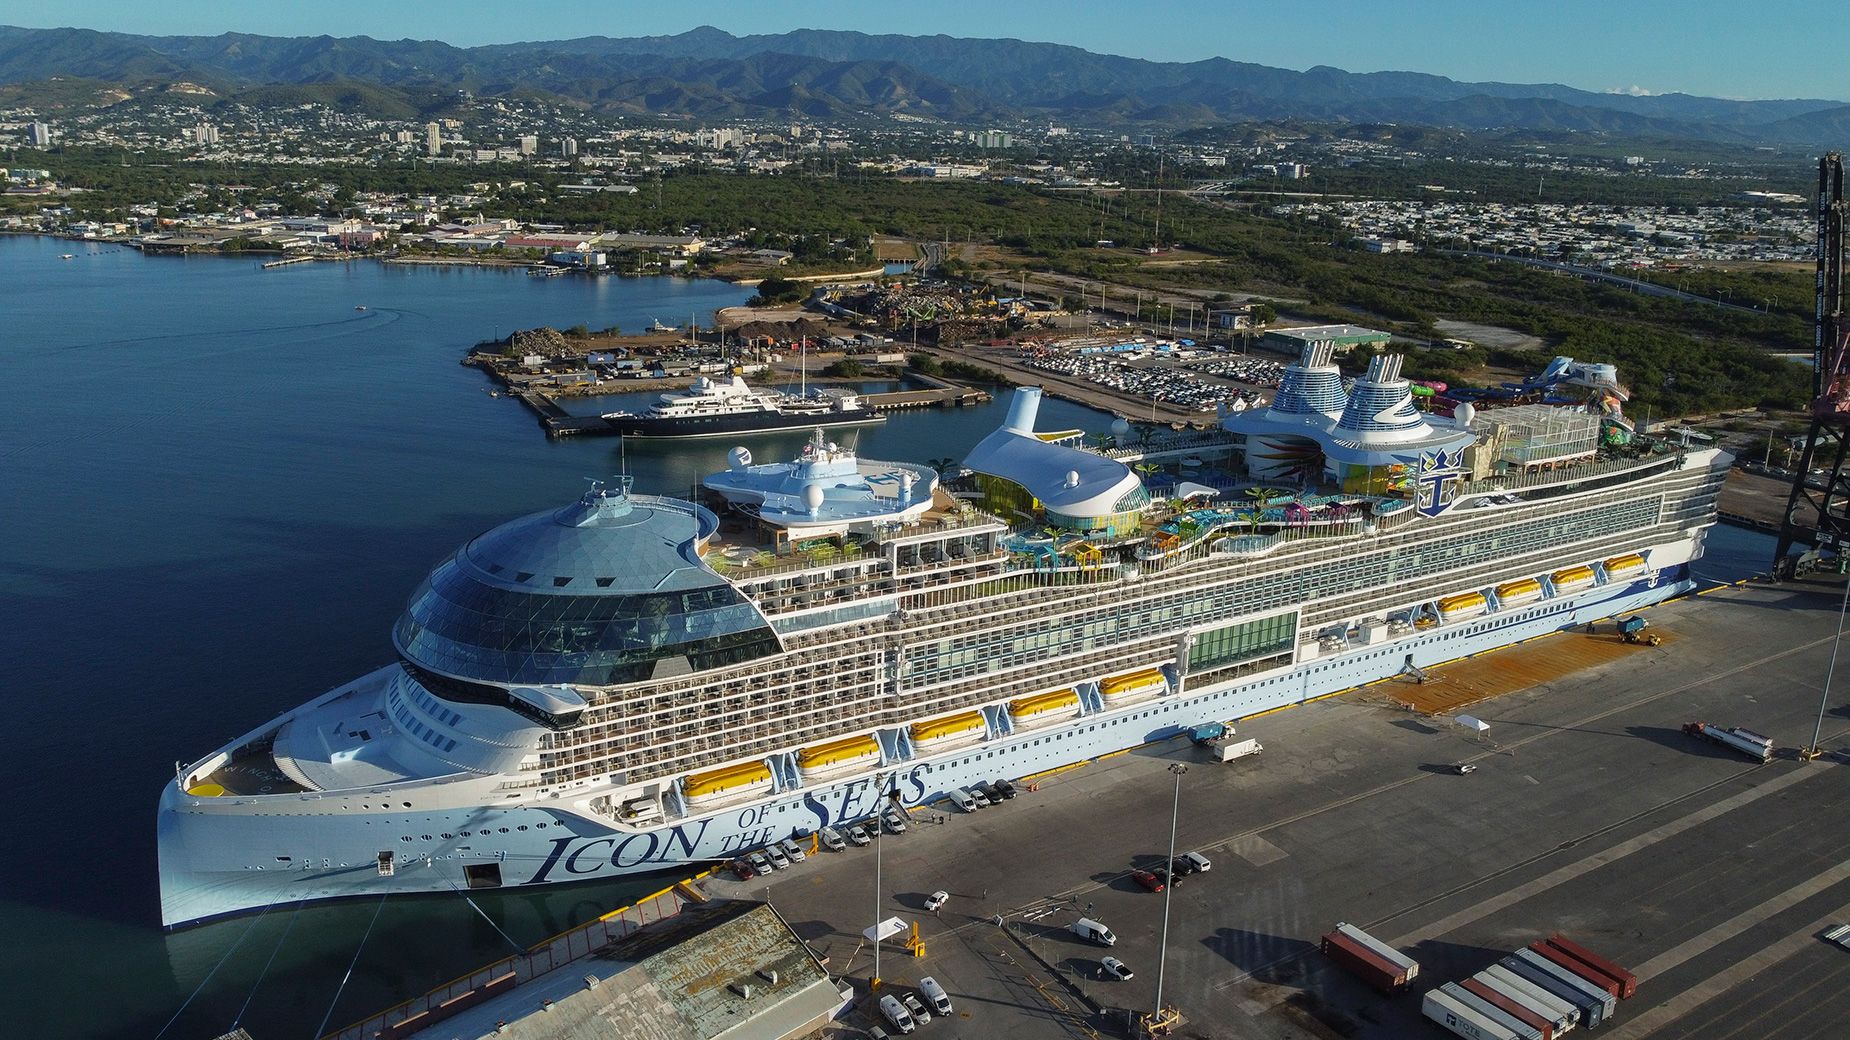 Royal Caribbean's Icon of the Seas, the world's largest cruise ship, arrived in Ponce, Puerto Rico on January 2.